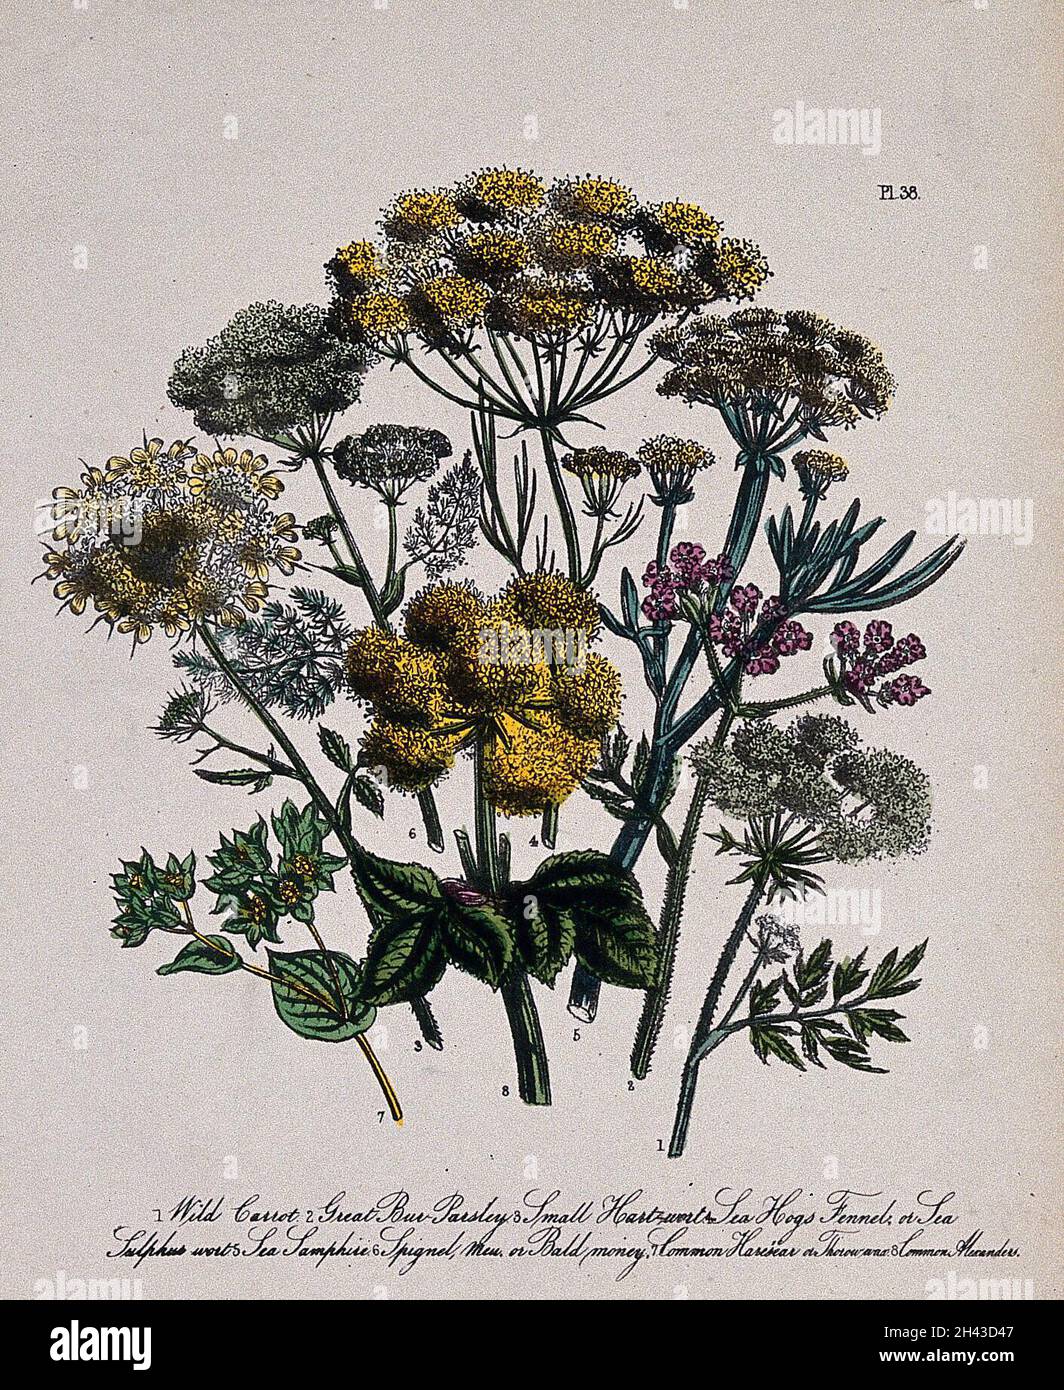 Eight British wild flowers, including wild carrot (Daucus carota), bur parsley (Caucalis) and hog's fennel (Peucedanum officinale). Coloured lithograph, c. 1856, after H. Humphreys. Stock Photo